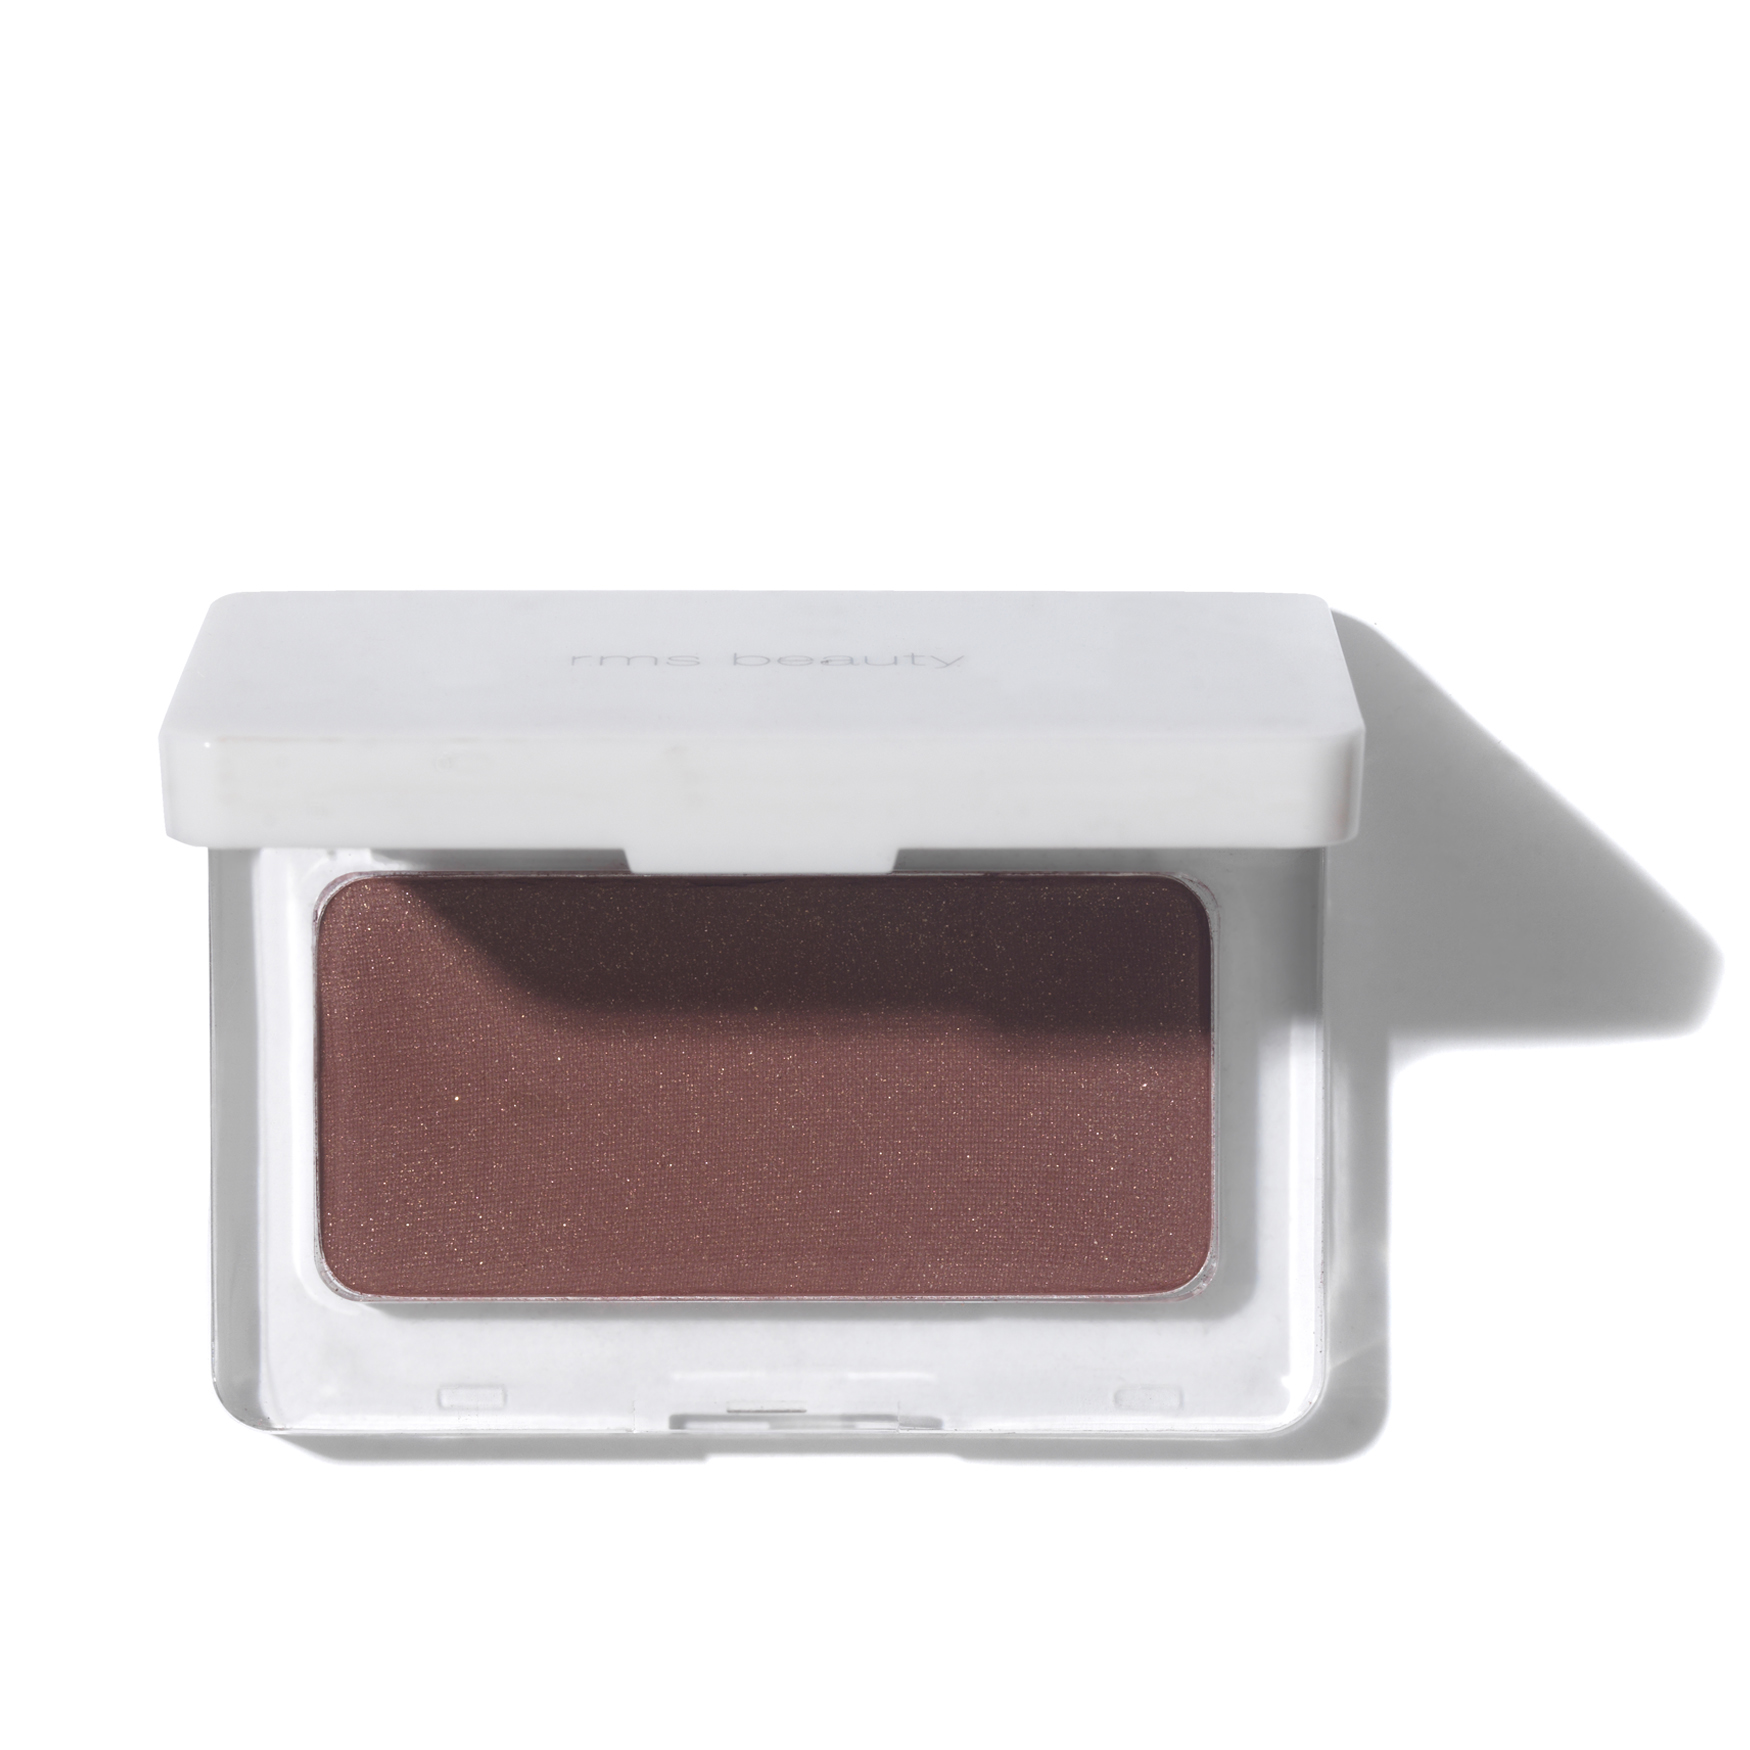 RMS Beauty Pressed Blush | Space NK